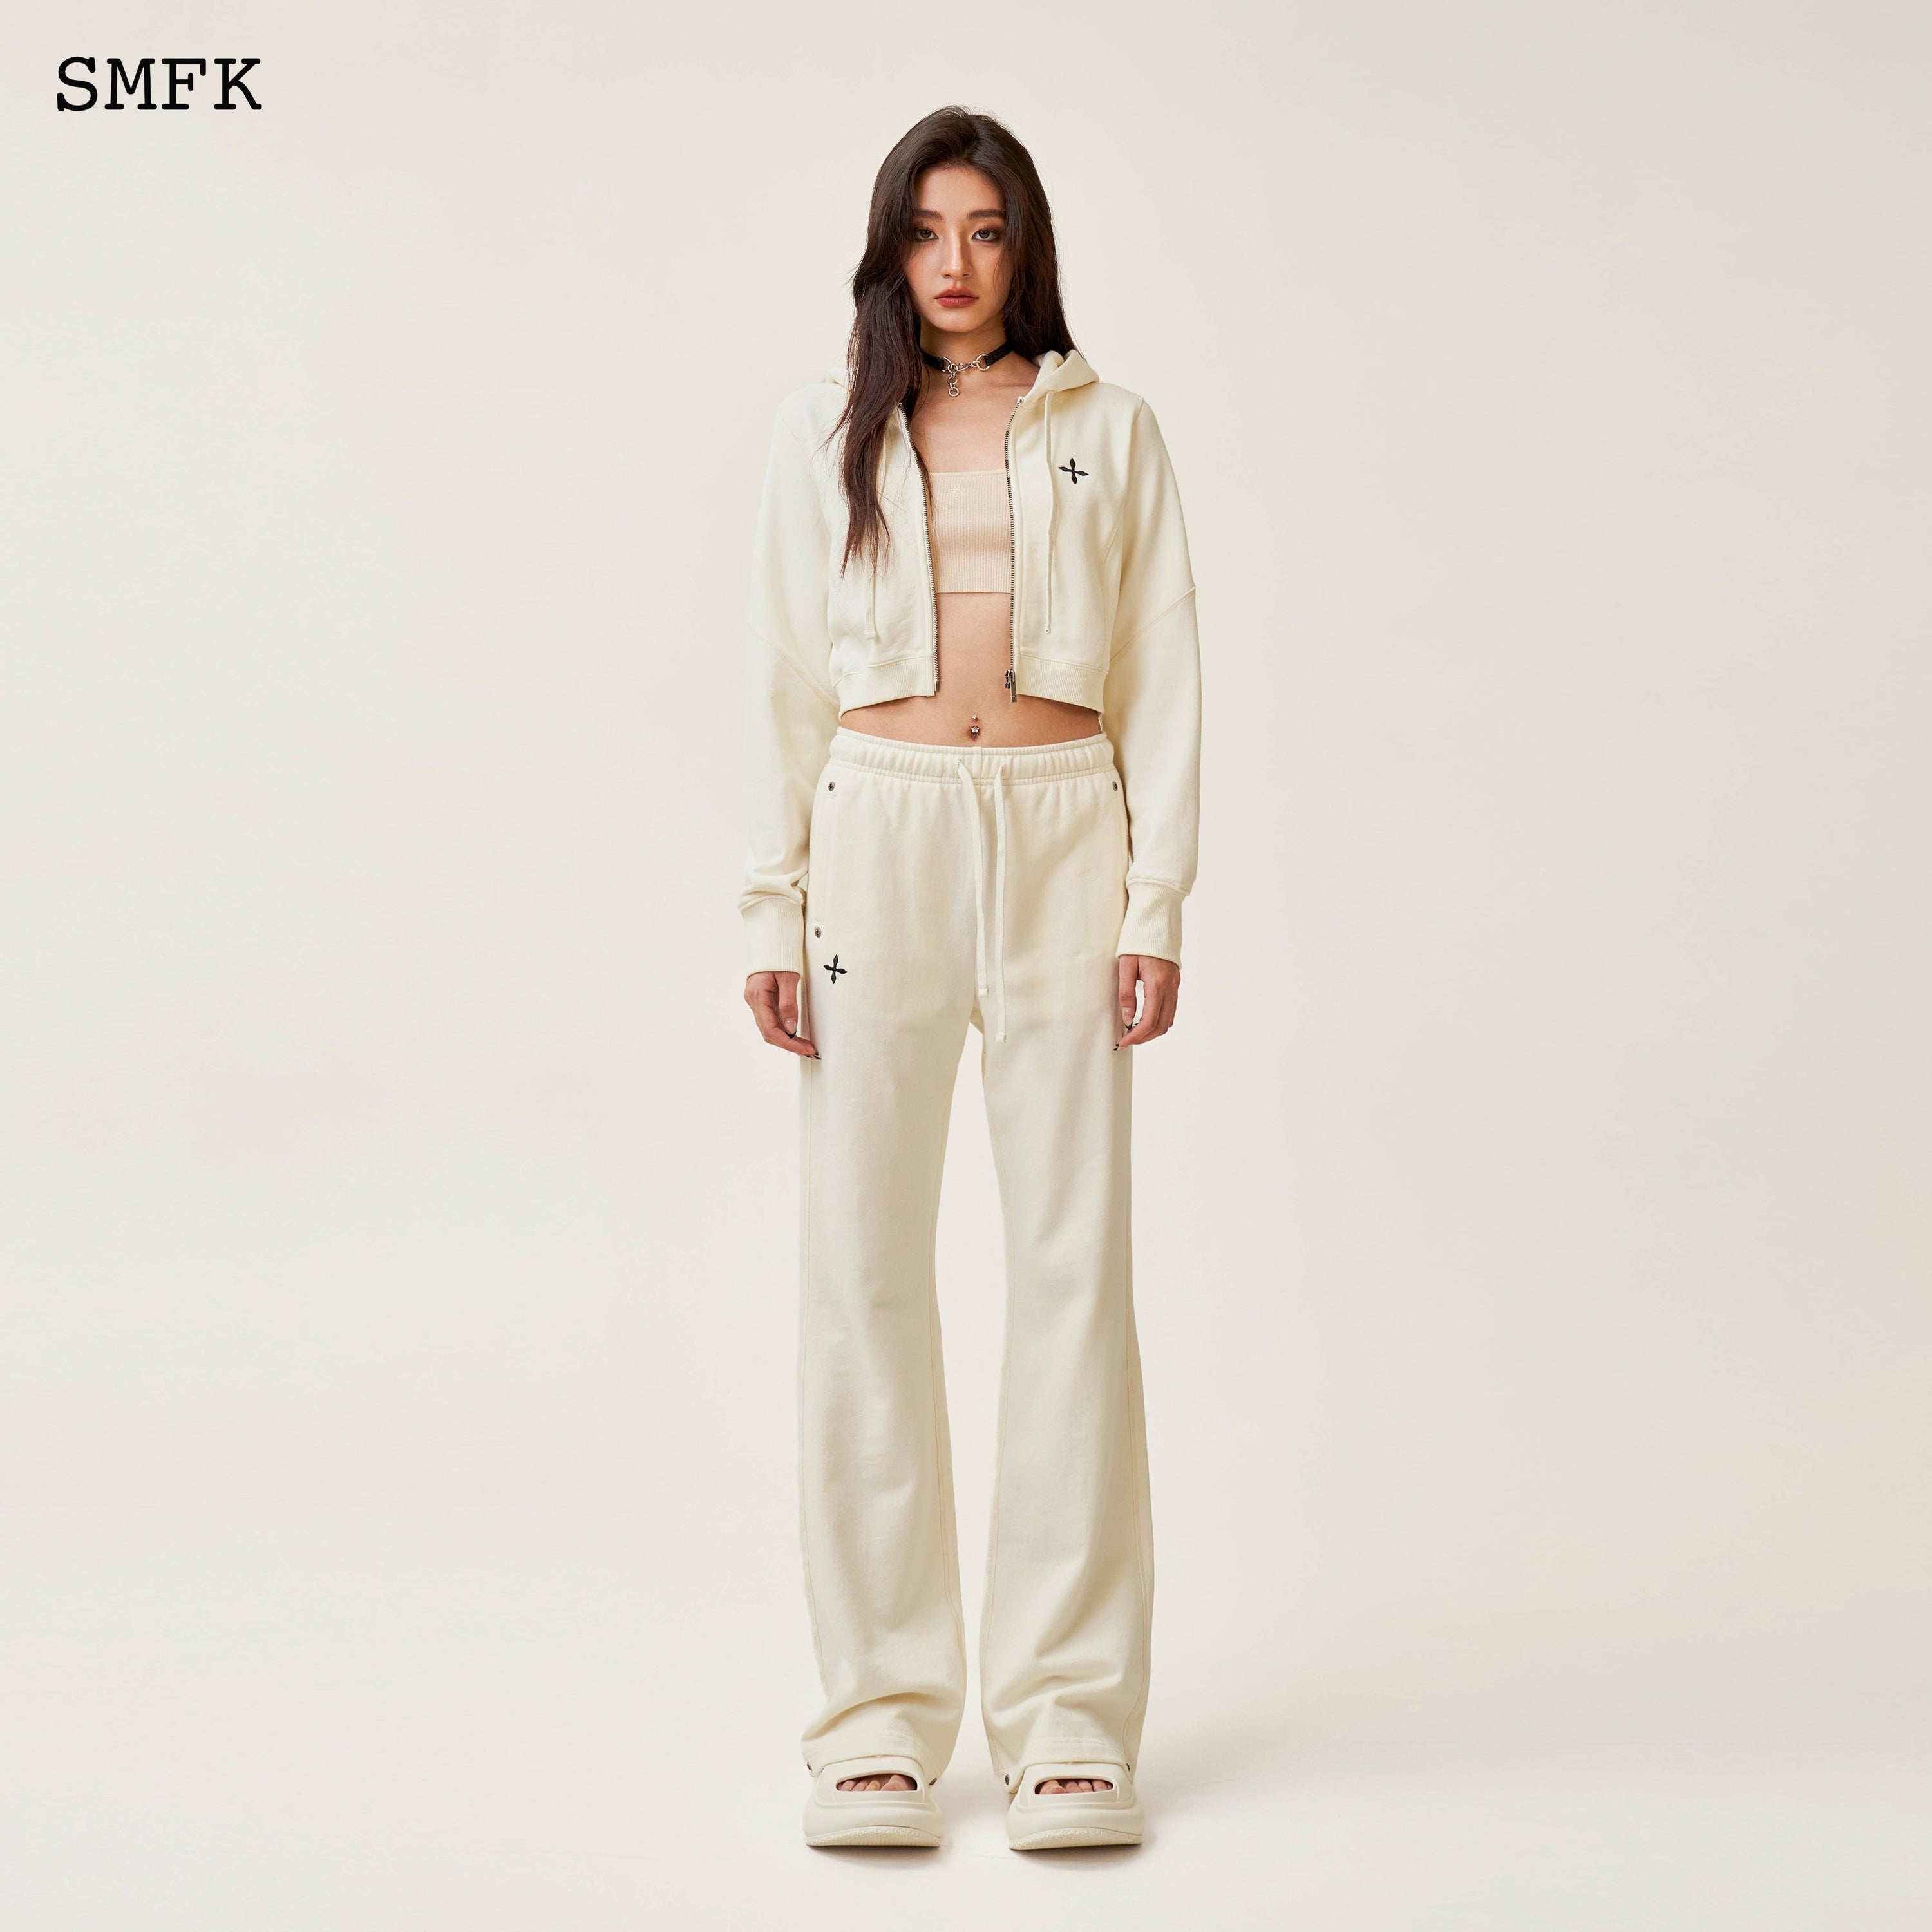 Compass Rove Jogging Sport Suit In White - SMFK Official